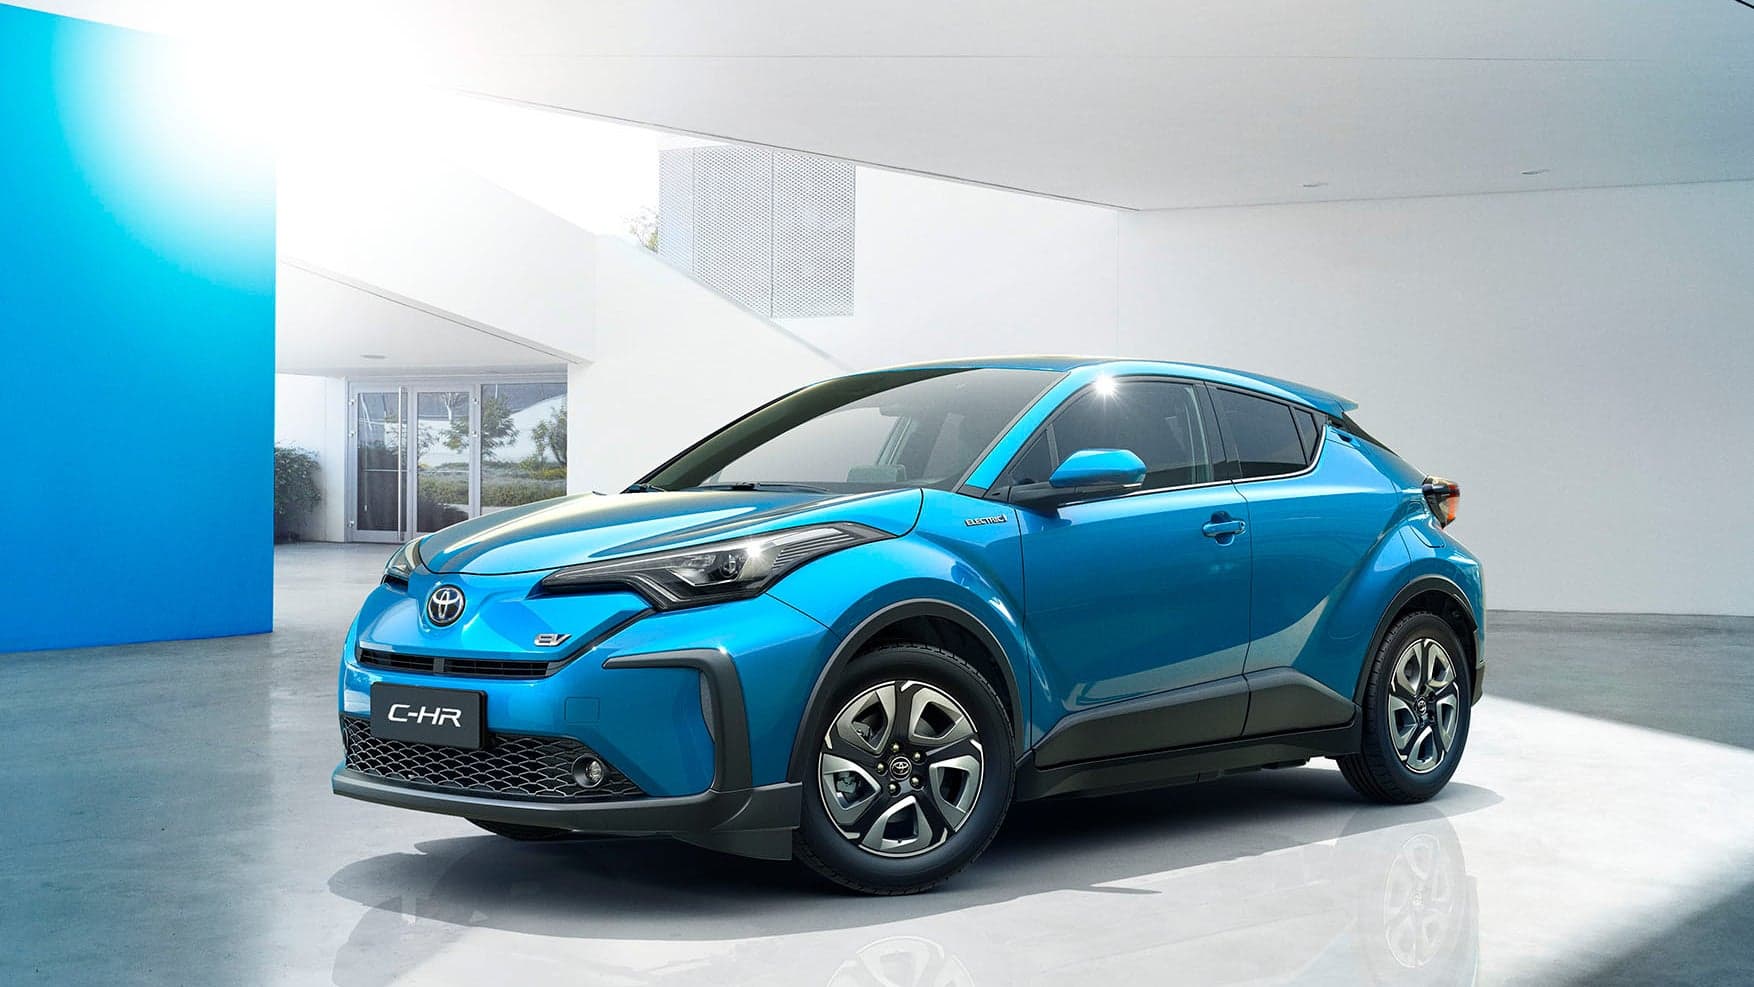 2020 Toyota C-HR Electric: Battery-Powered City Commuter Takes Aim at US, Chinese Markets